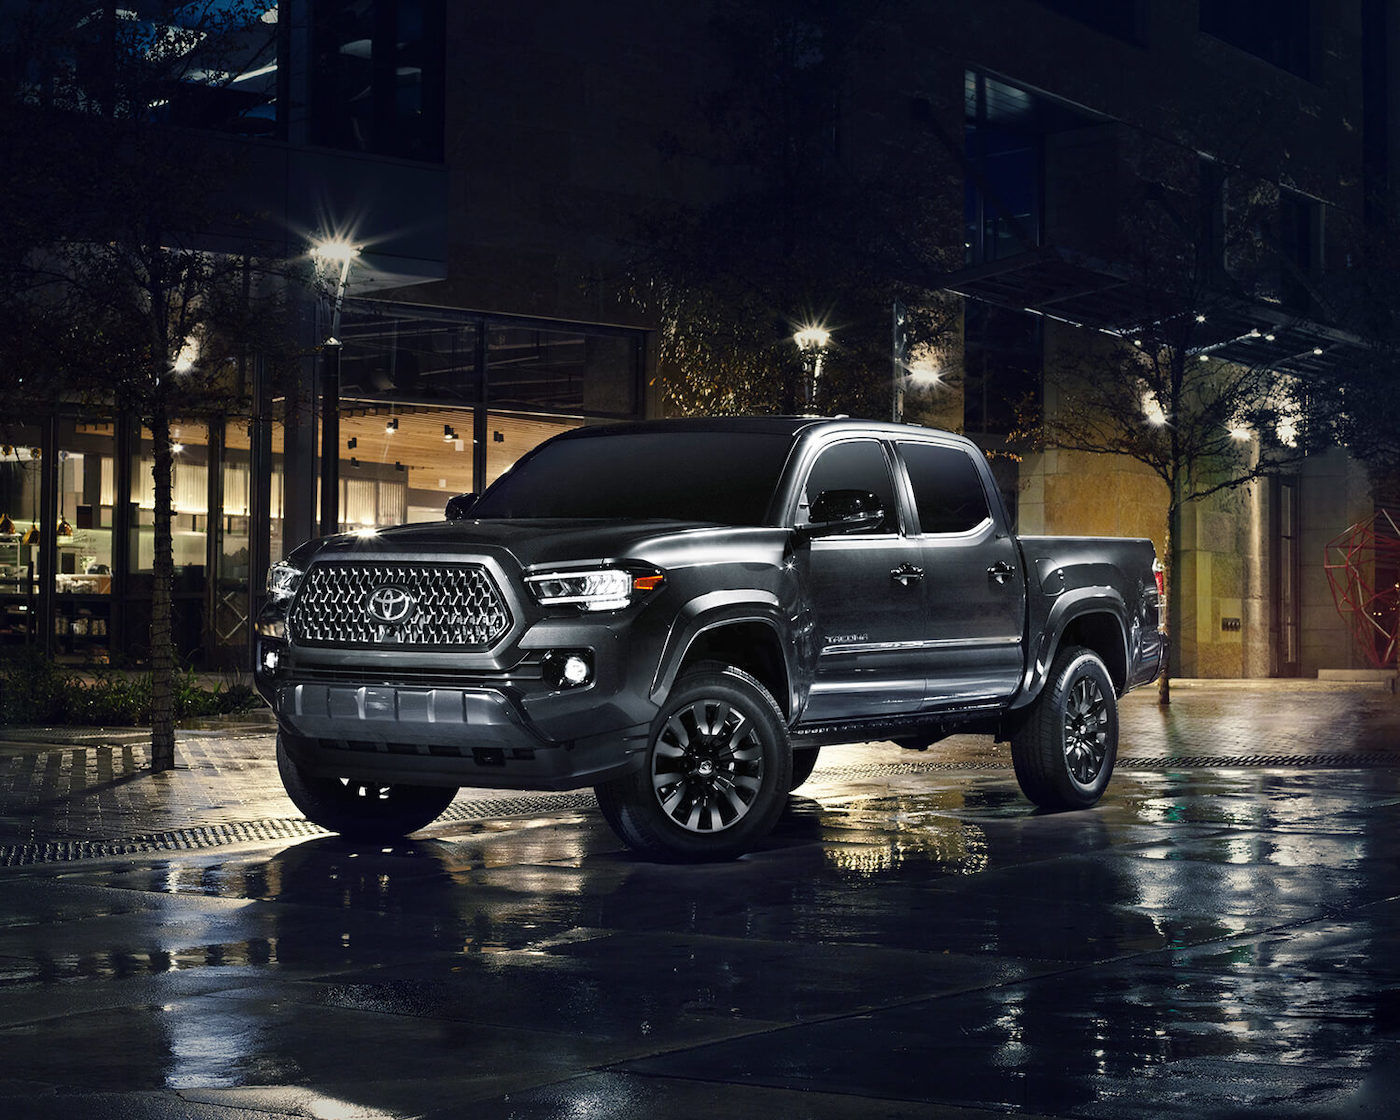 Front 3/4 view of a 2022 Toyota Tacoma Nightshade with its black trims parked in town